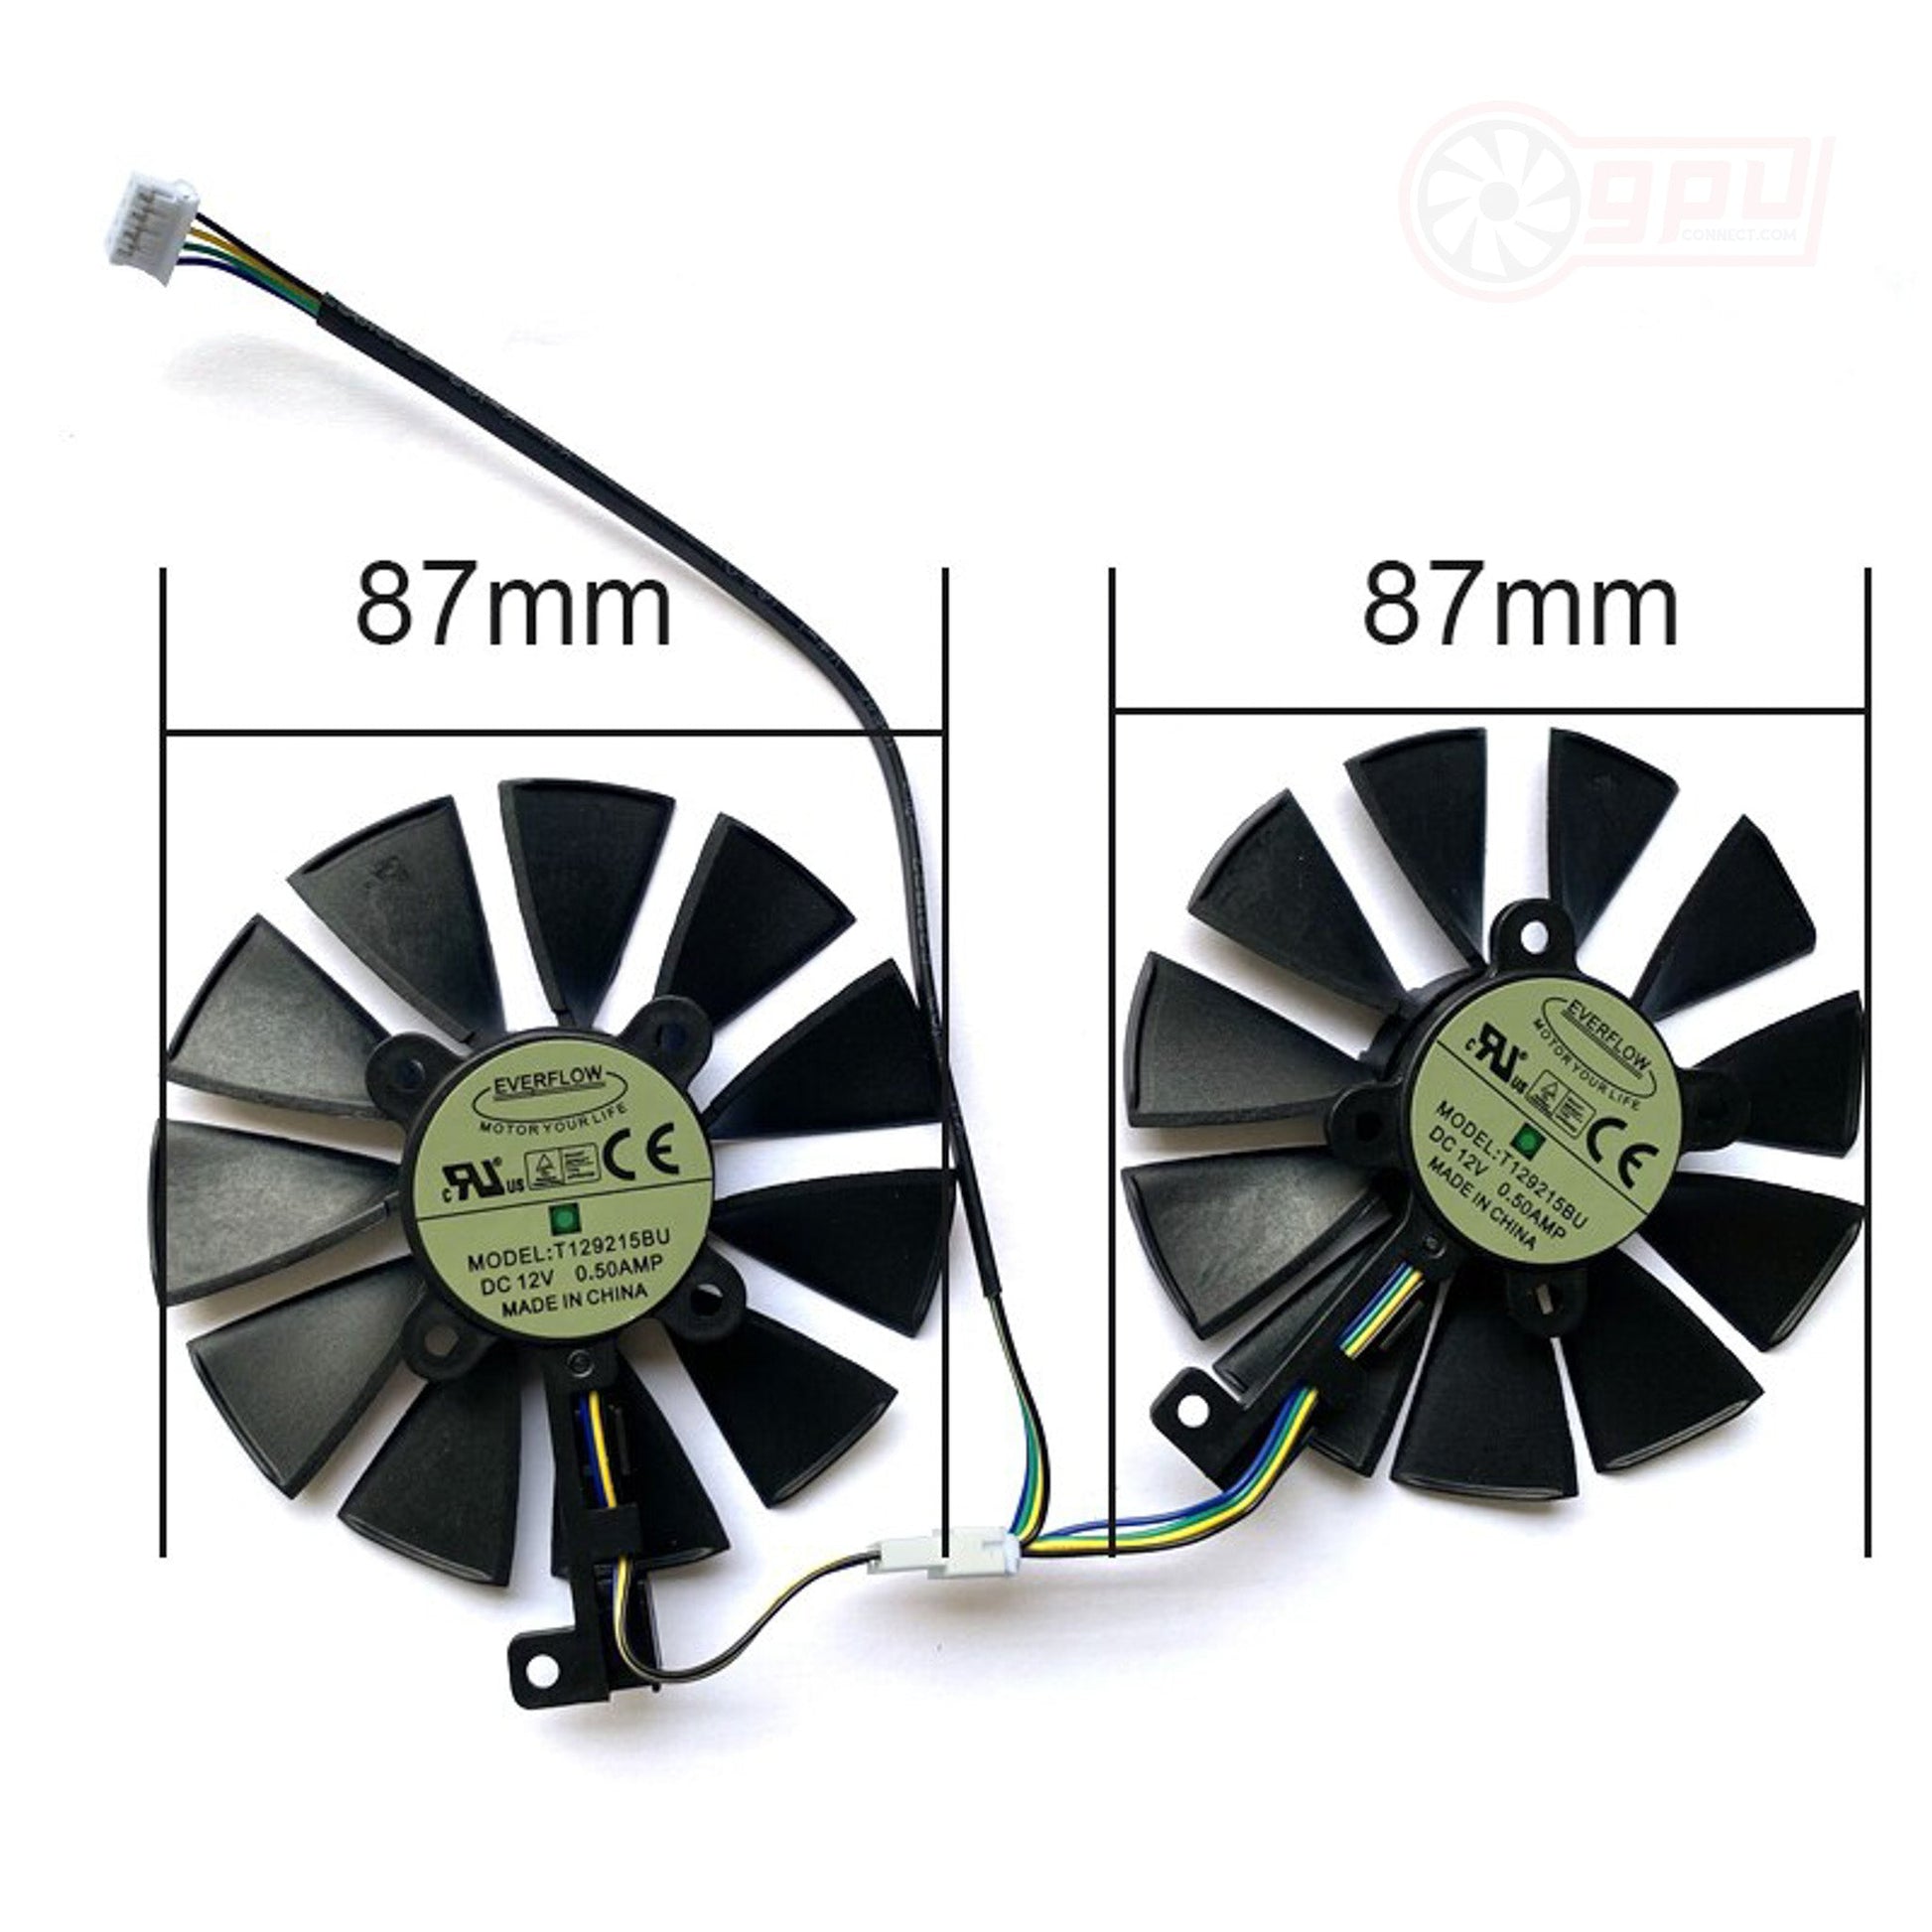 ASUS AREZ RX 580 570 470 Mining Expedition OC Replacement Fan - GPUCONNECT.COM